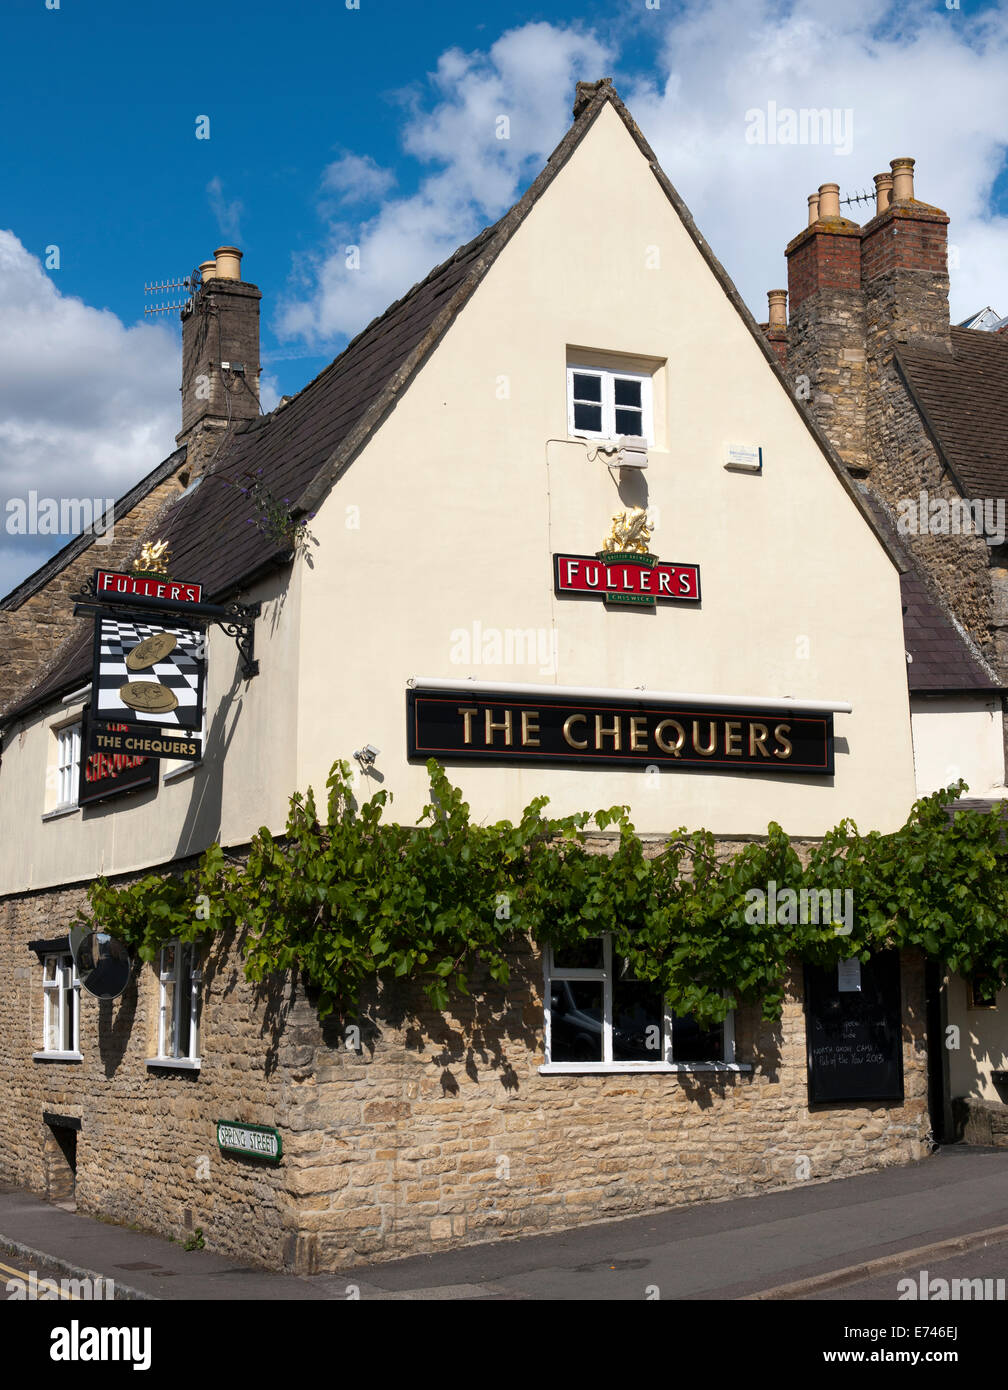 The Chequers Public House, Goddard's Lane, Chipping Norton, Oxfordshire, England, UK. Stock Photo